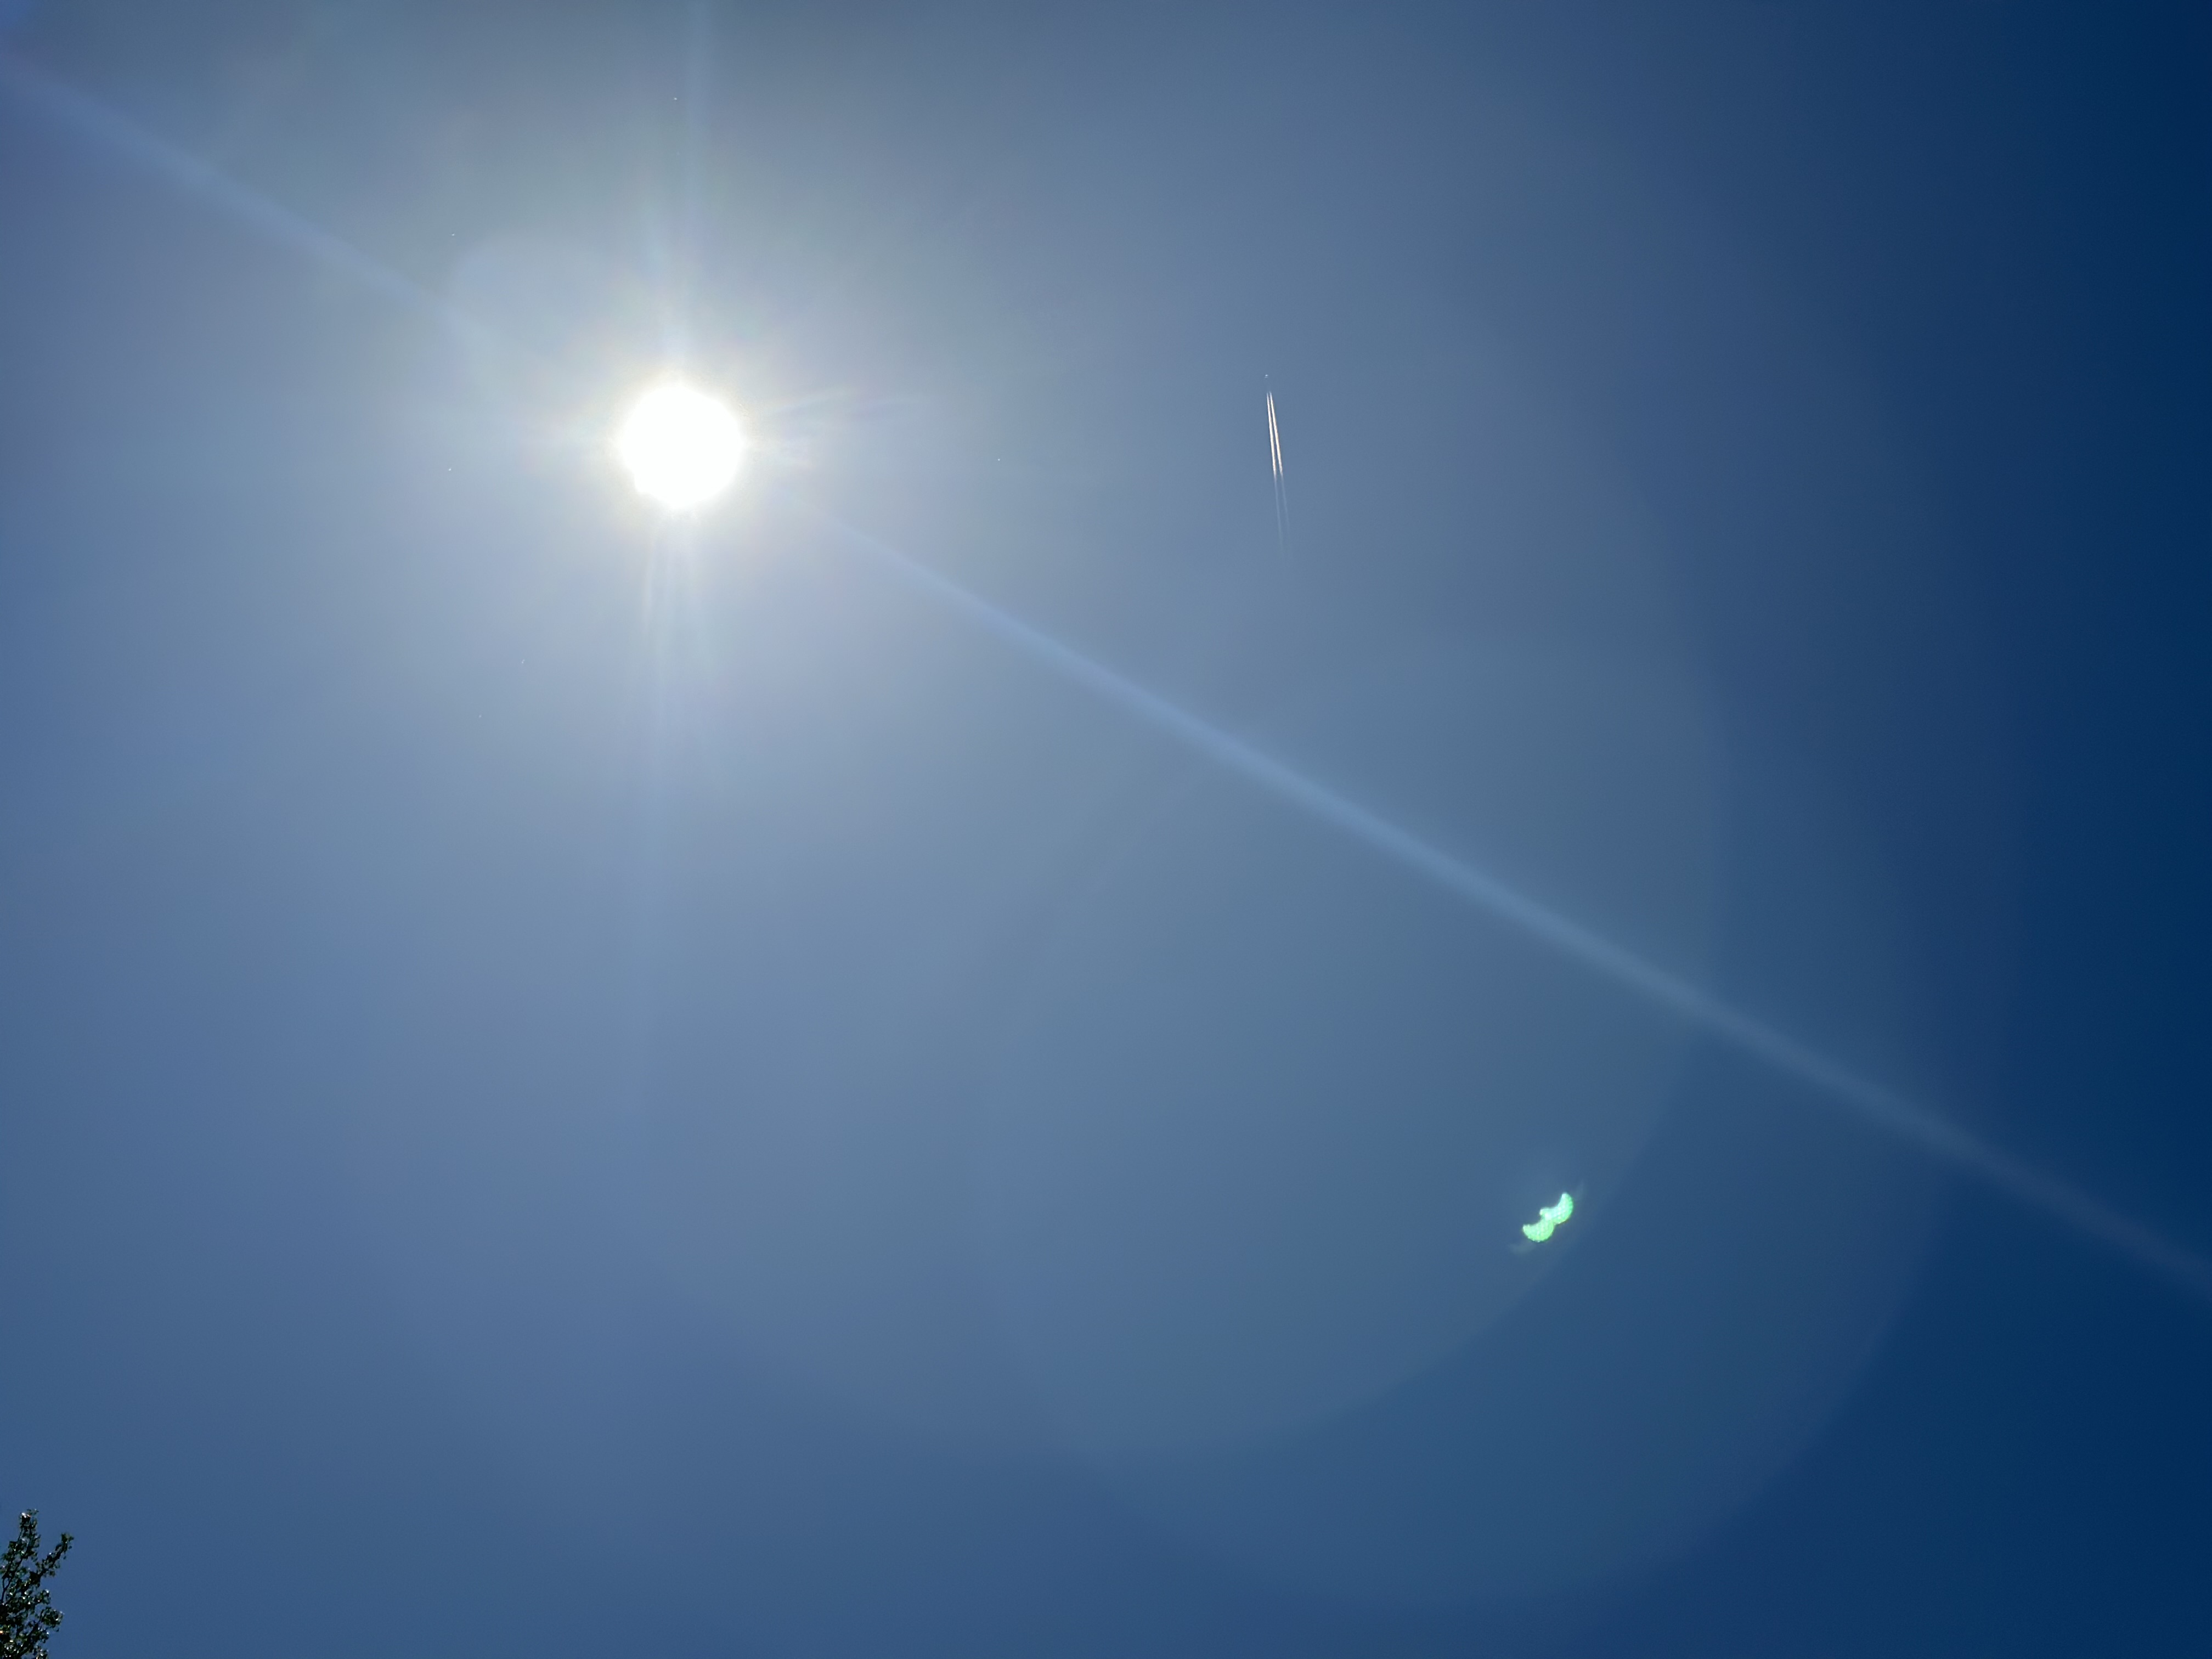 Lens flare in the shape of the eclipse with contrails